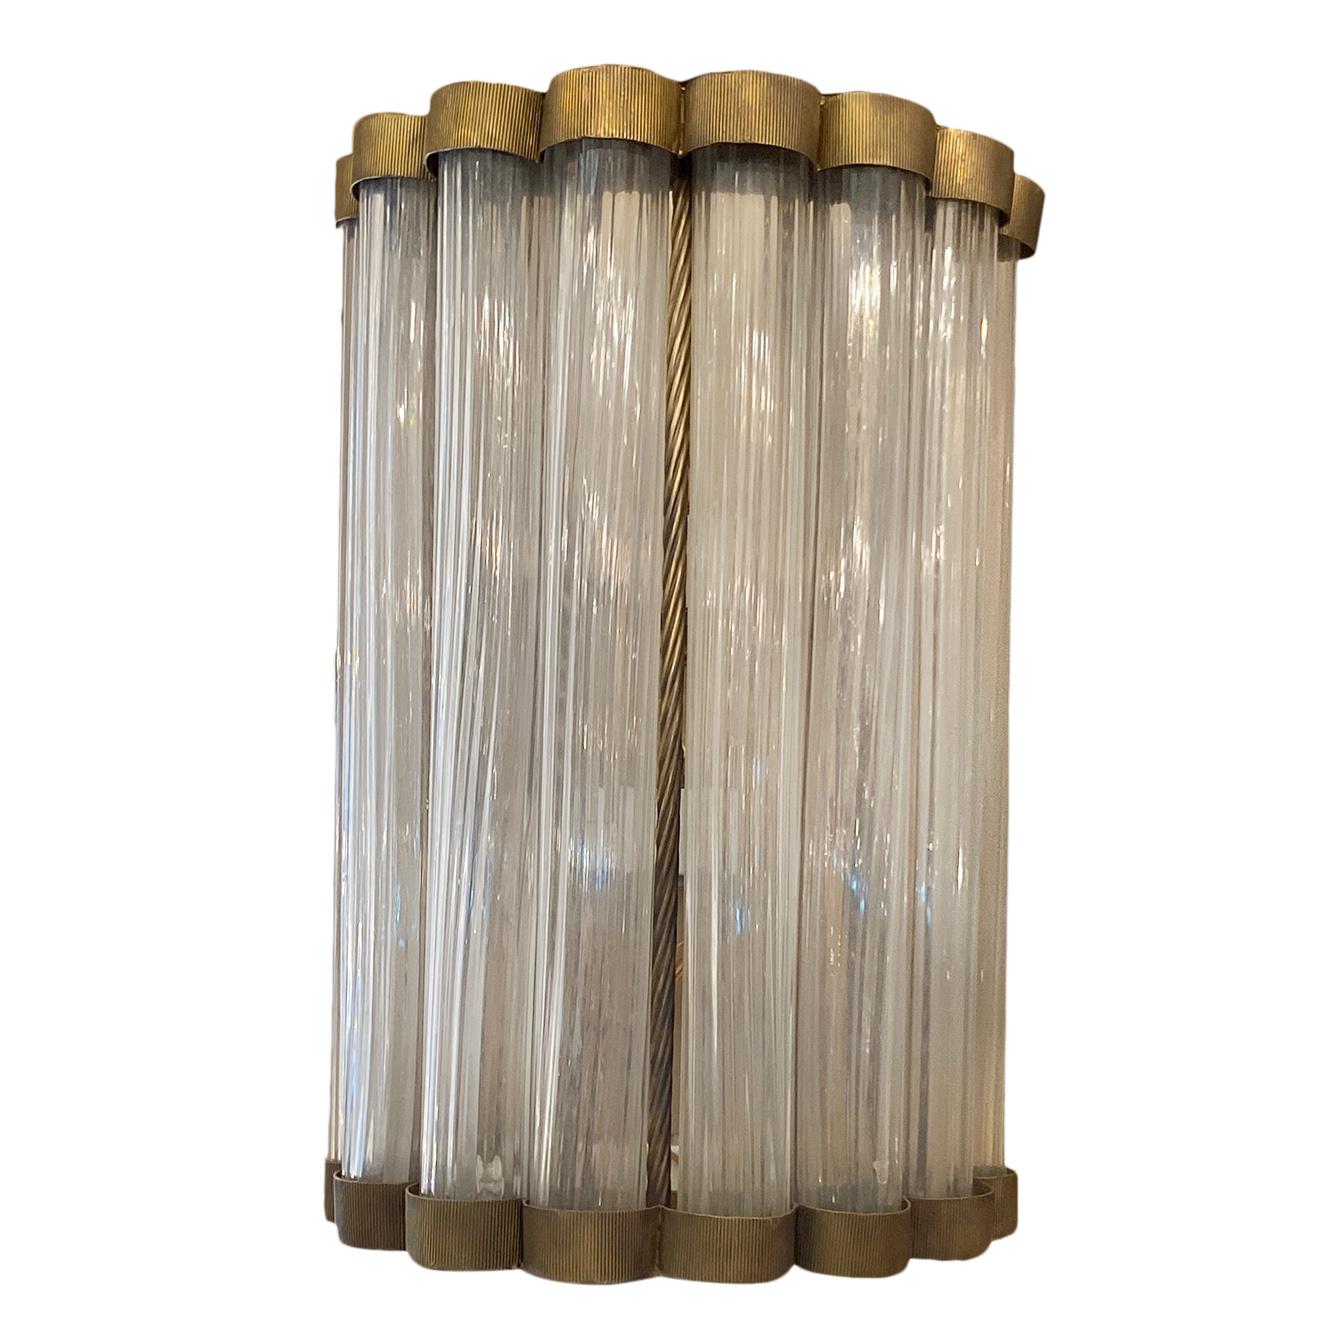 A pair of circa 1940s Italian glass sconces with interior lights.
Measurements:
Height 20